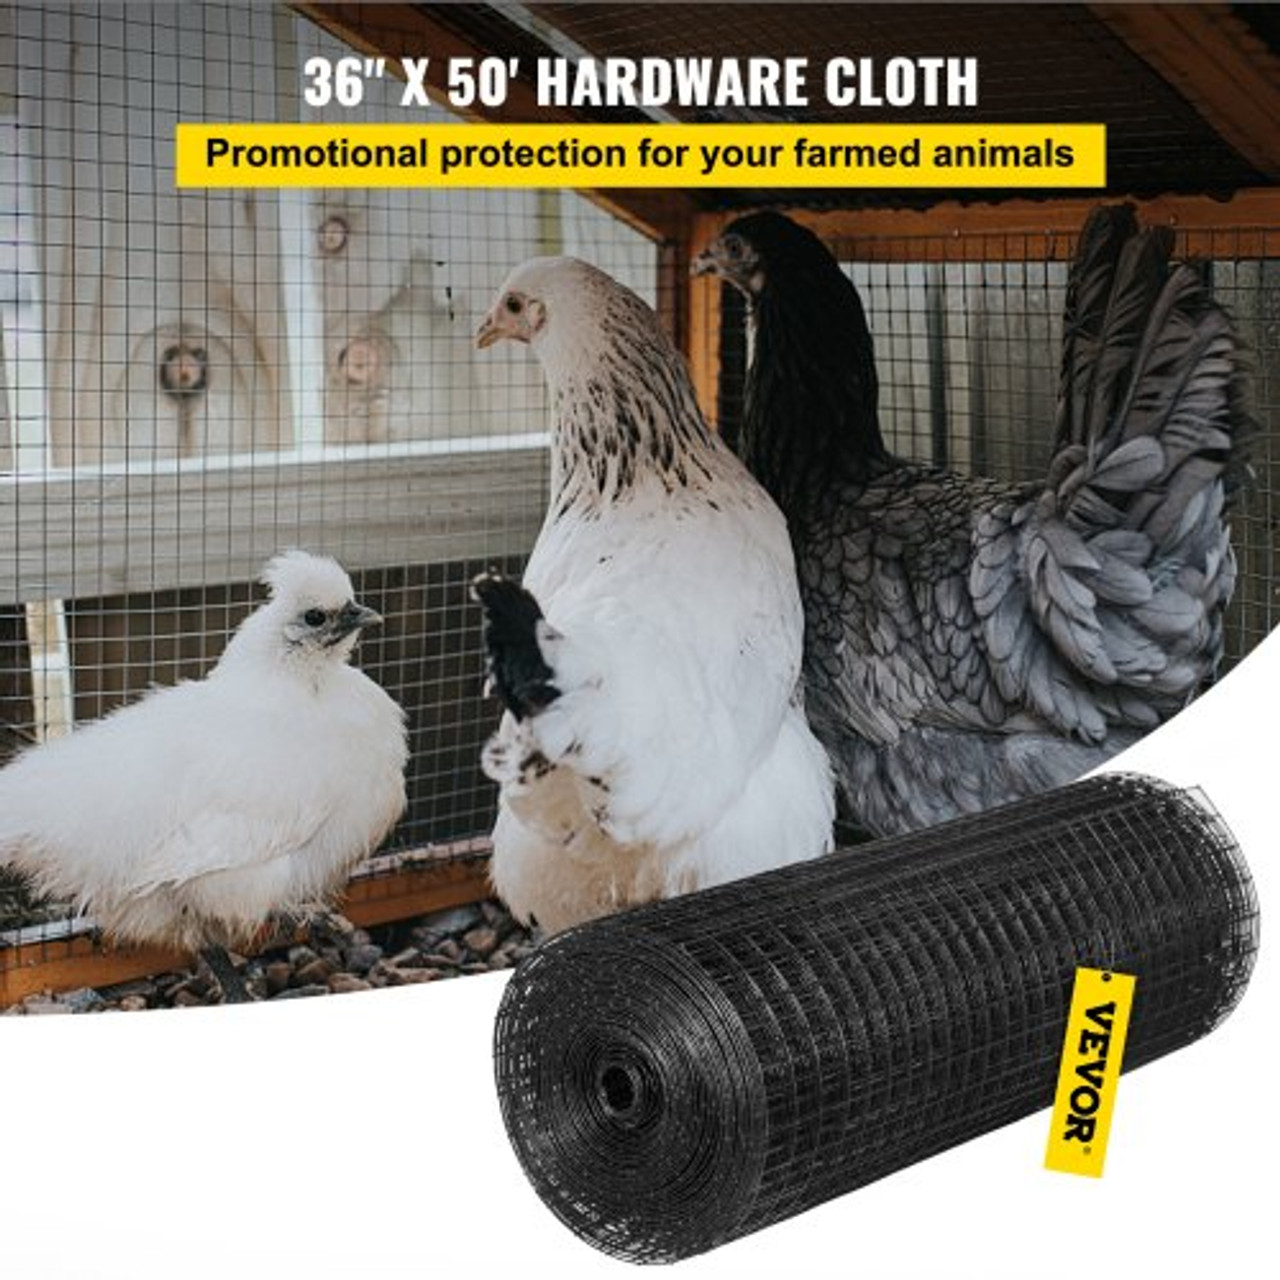 Hardware Cloth, 36" x 50' & 1"x1" Mesh Size, Galvanized Steel Vinyl Coated 16 Gauge Chicken Wire Fencing w/A Cutting Plier & A Pair of Fabric Gloves, for Garden Fencing & Pet Enclosures, Black